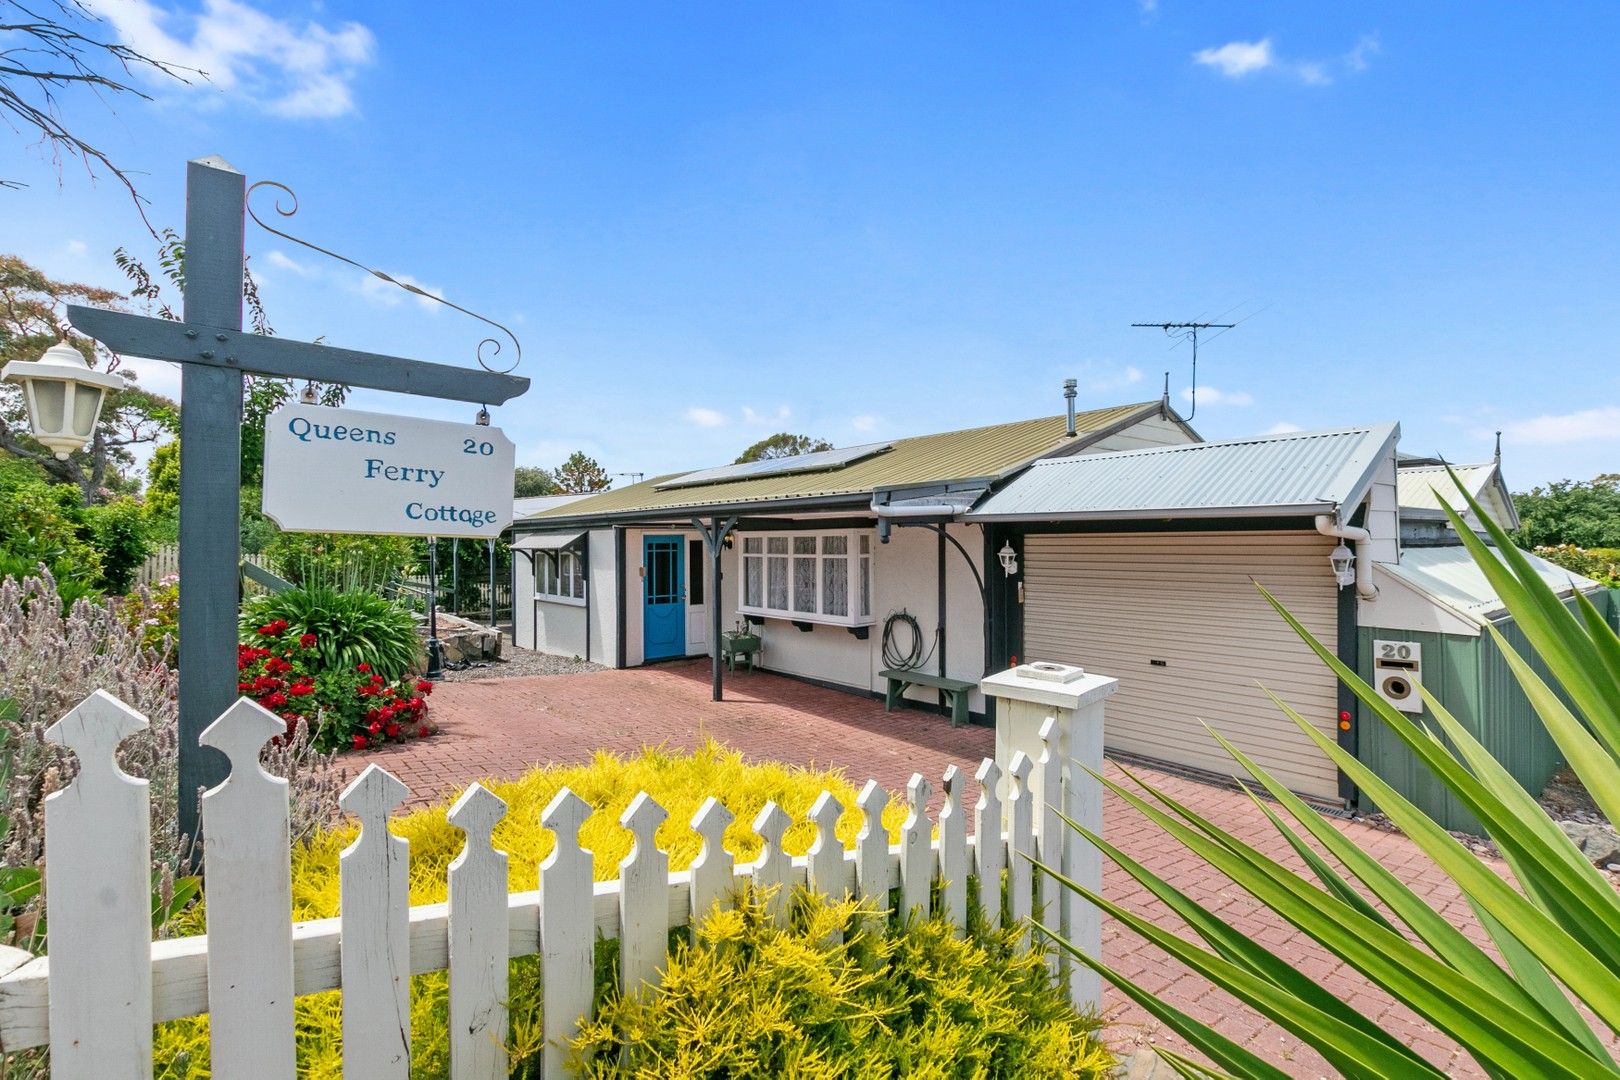 20 Queensferry Road, Old Reynella SA 5161, Image 0